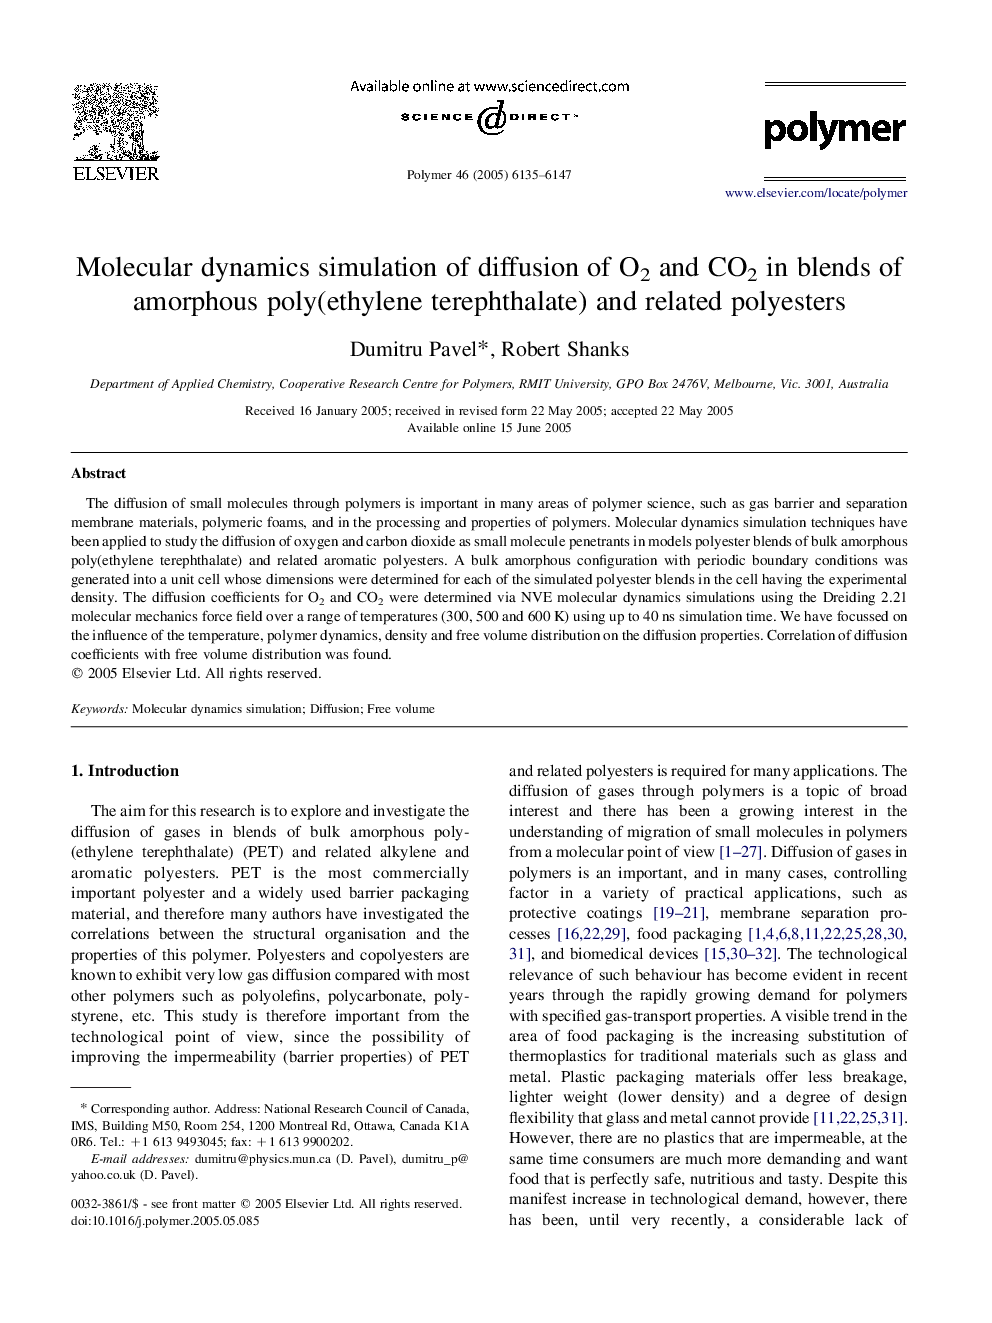 Molecular dynamics simulation of diffusion of O2 and CO2 in blends of amorphous poly(ethylene terephthalate) and related polyesters